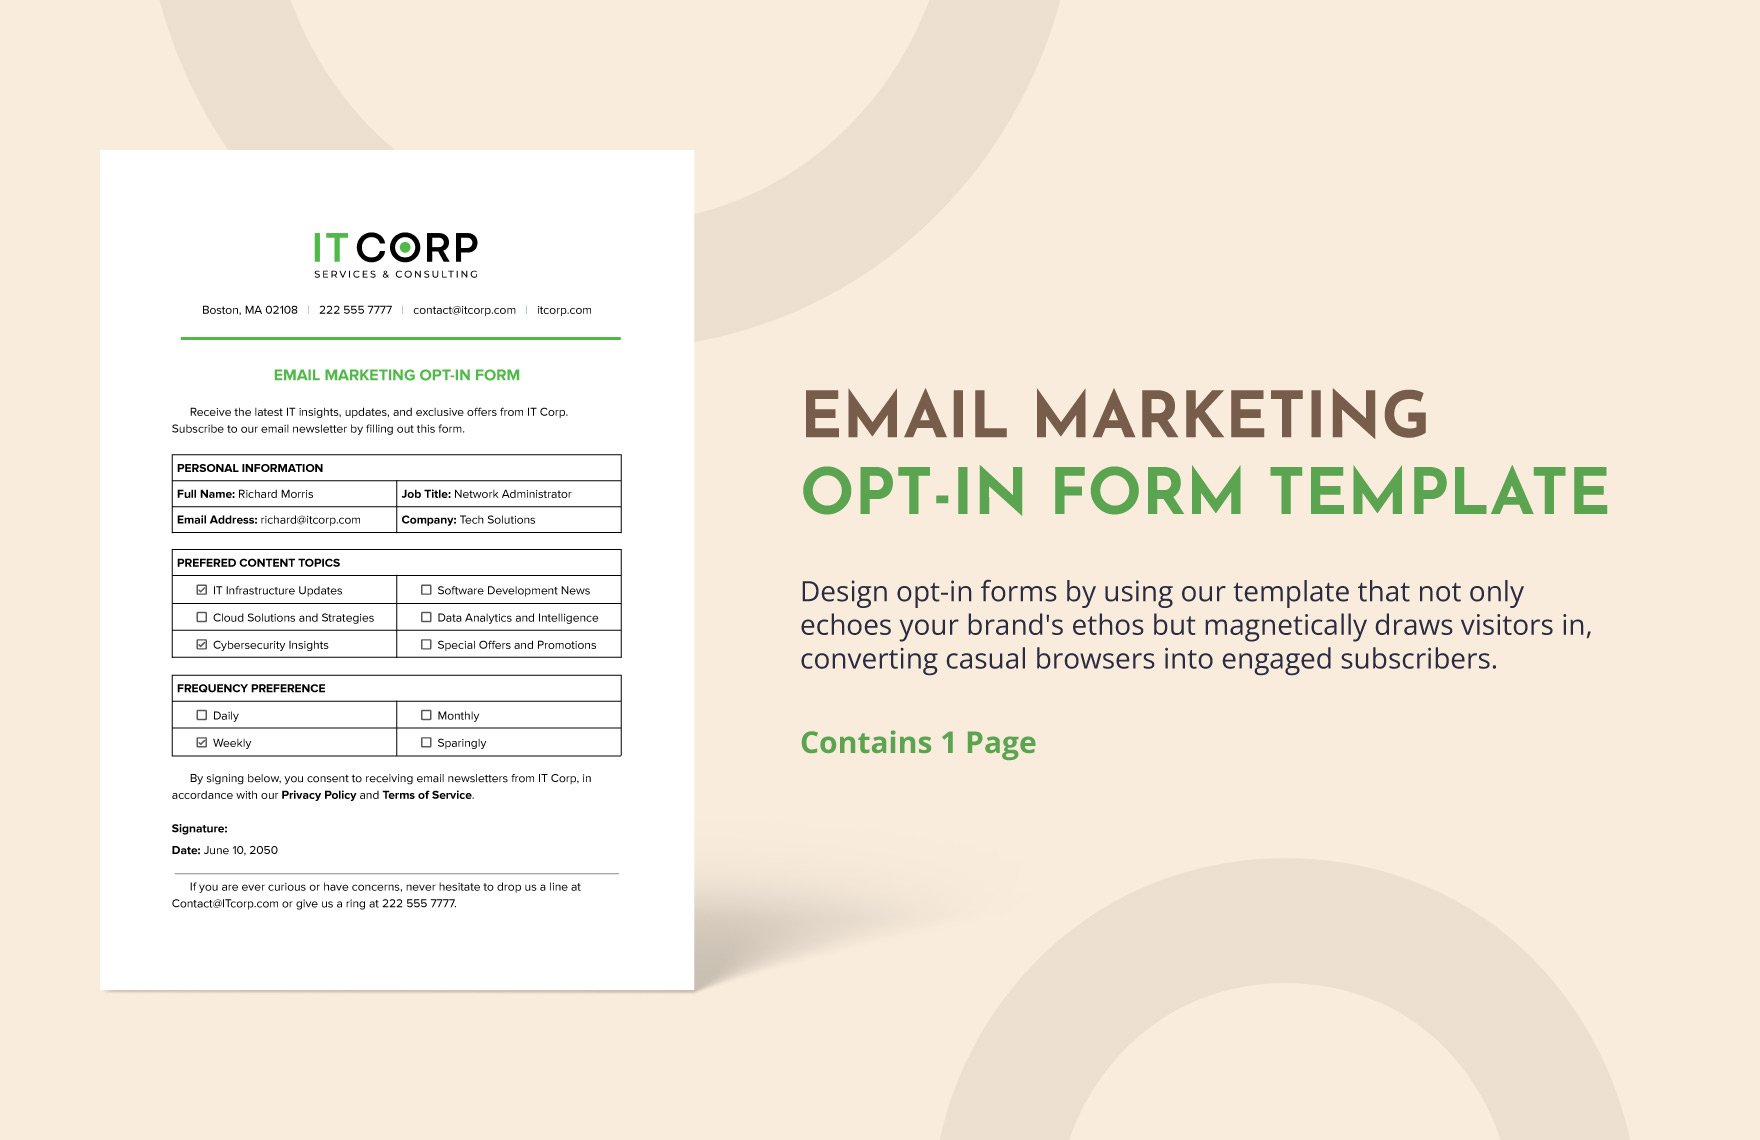 Email Marketing Opt-In Form Template